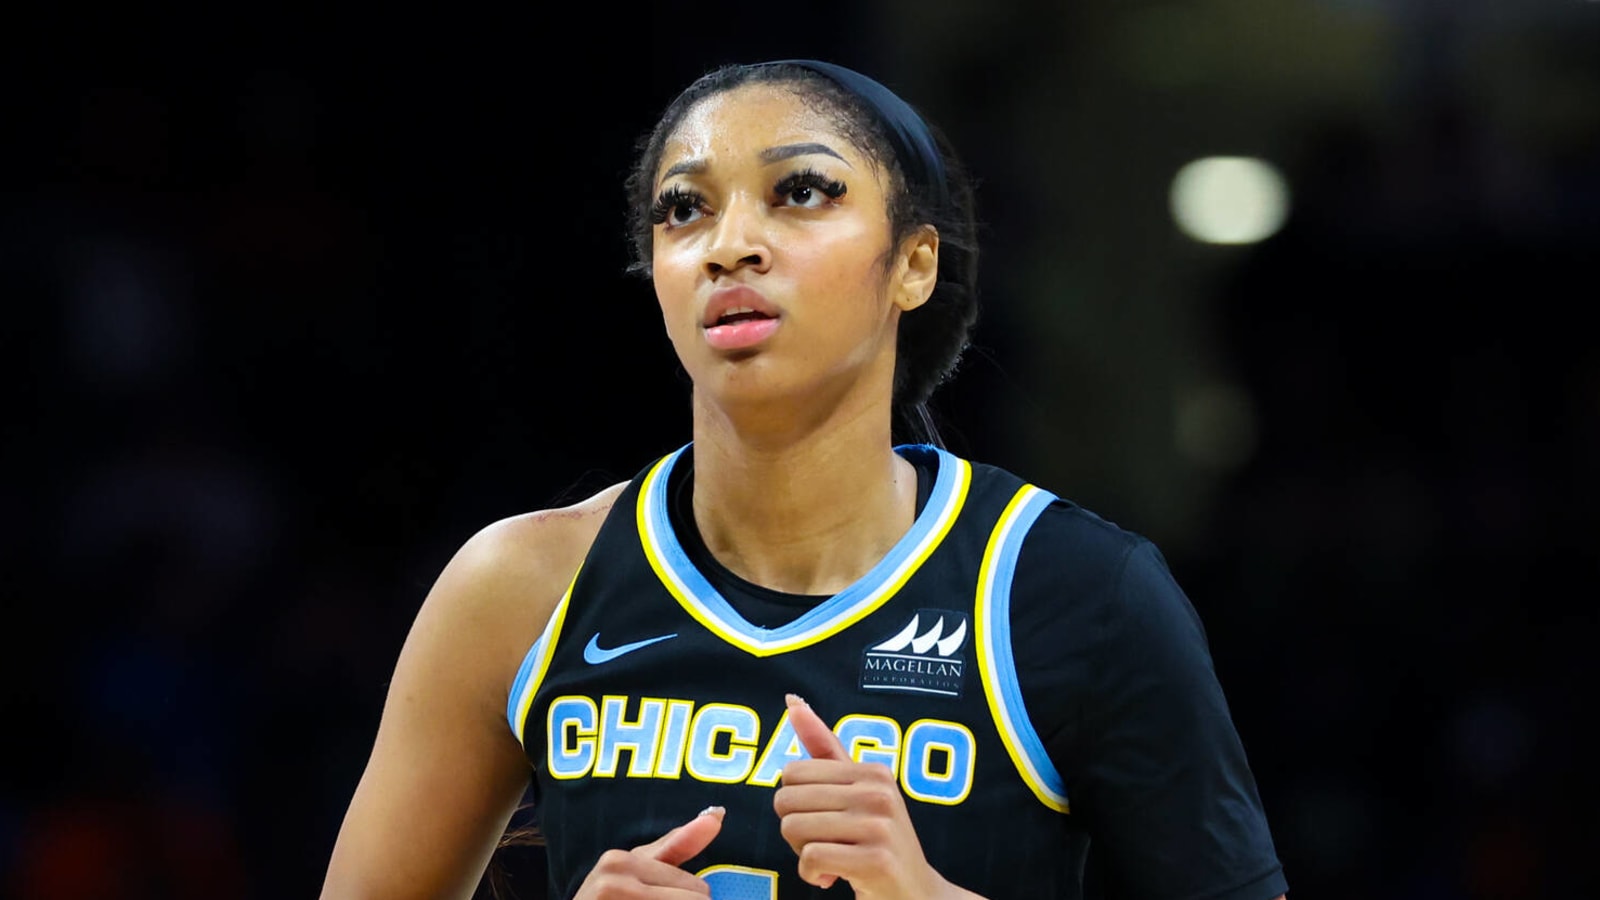 Sky win first game of season, Angel Reese sets WNBA record